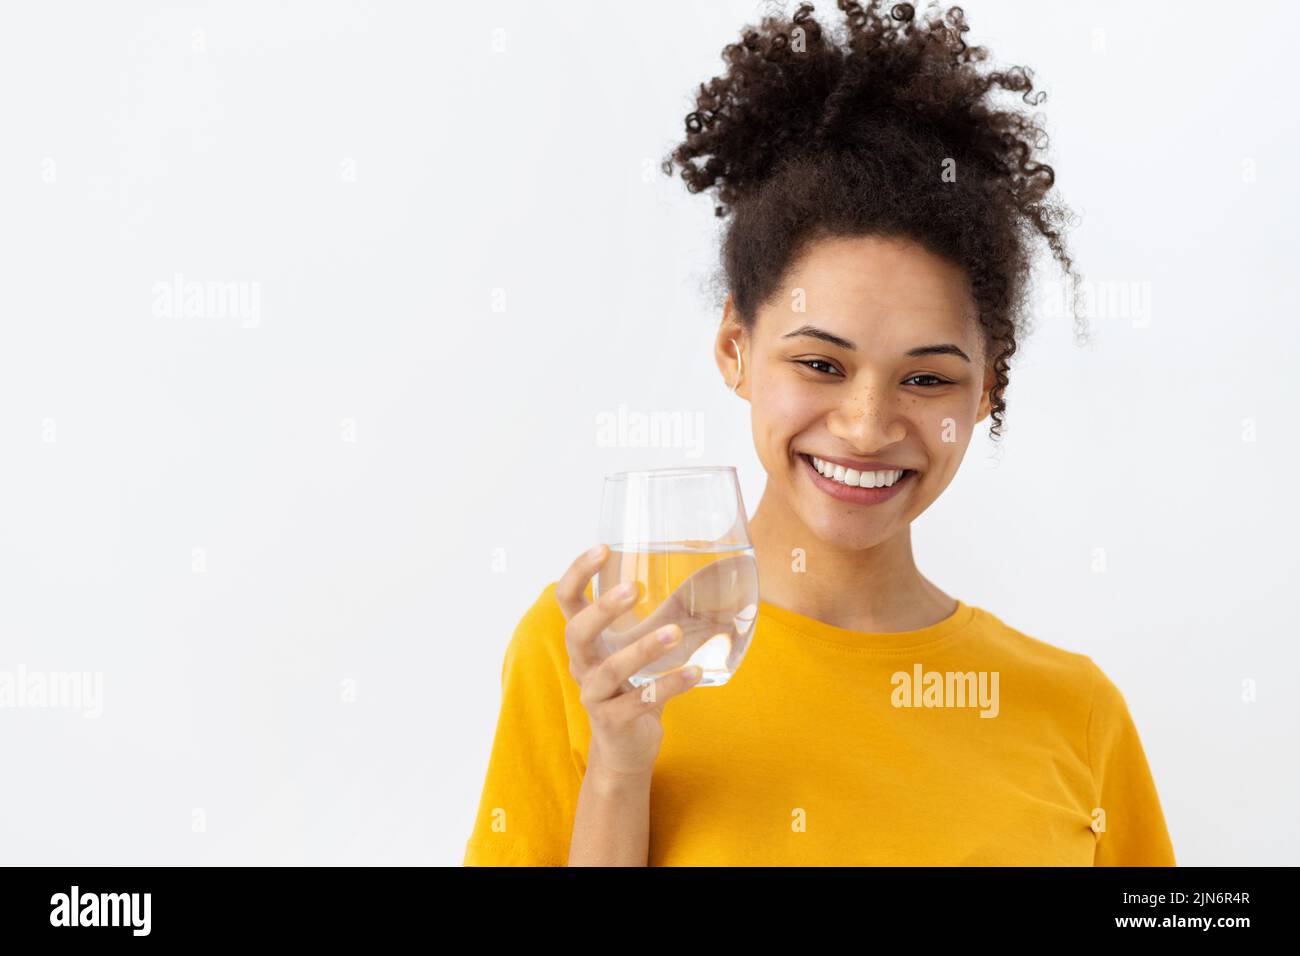 Healthy lifestyle Smiling young woman holding glass of fresh clean water looking at camera and smiling friendly Stock Photo